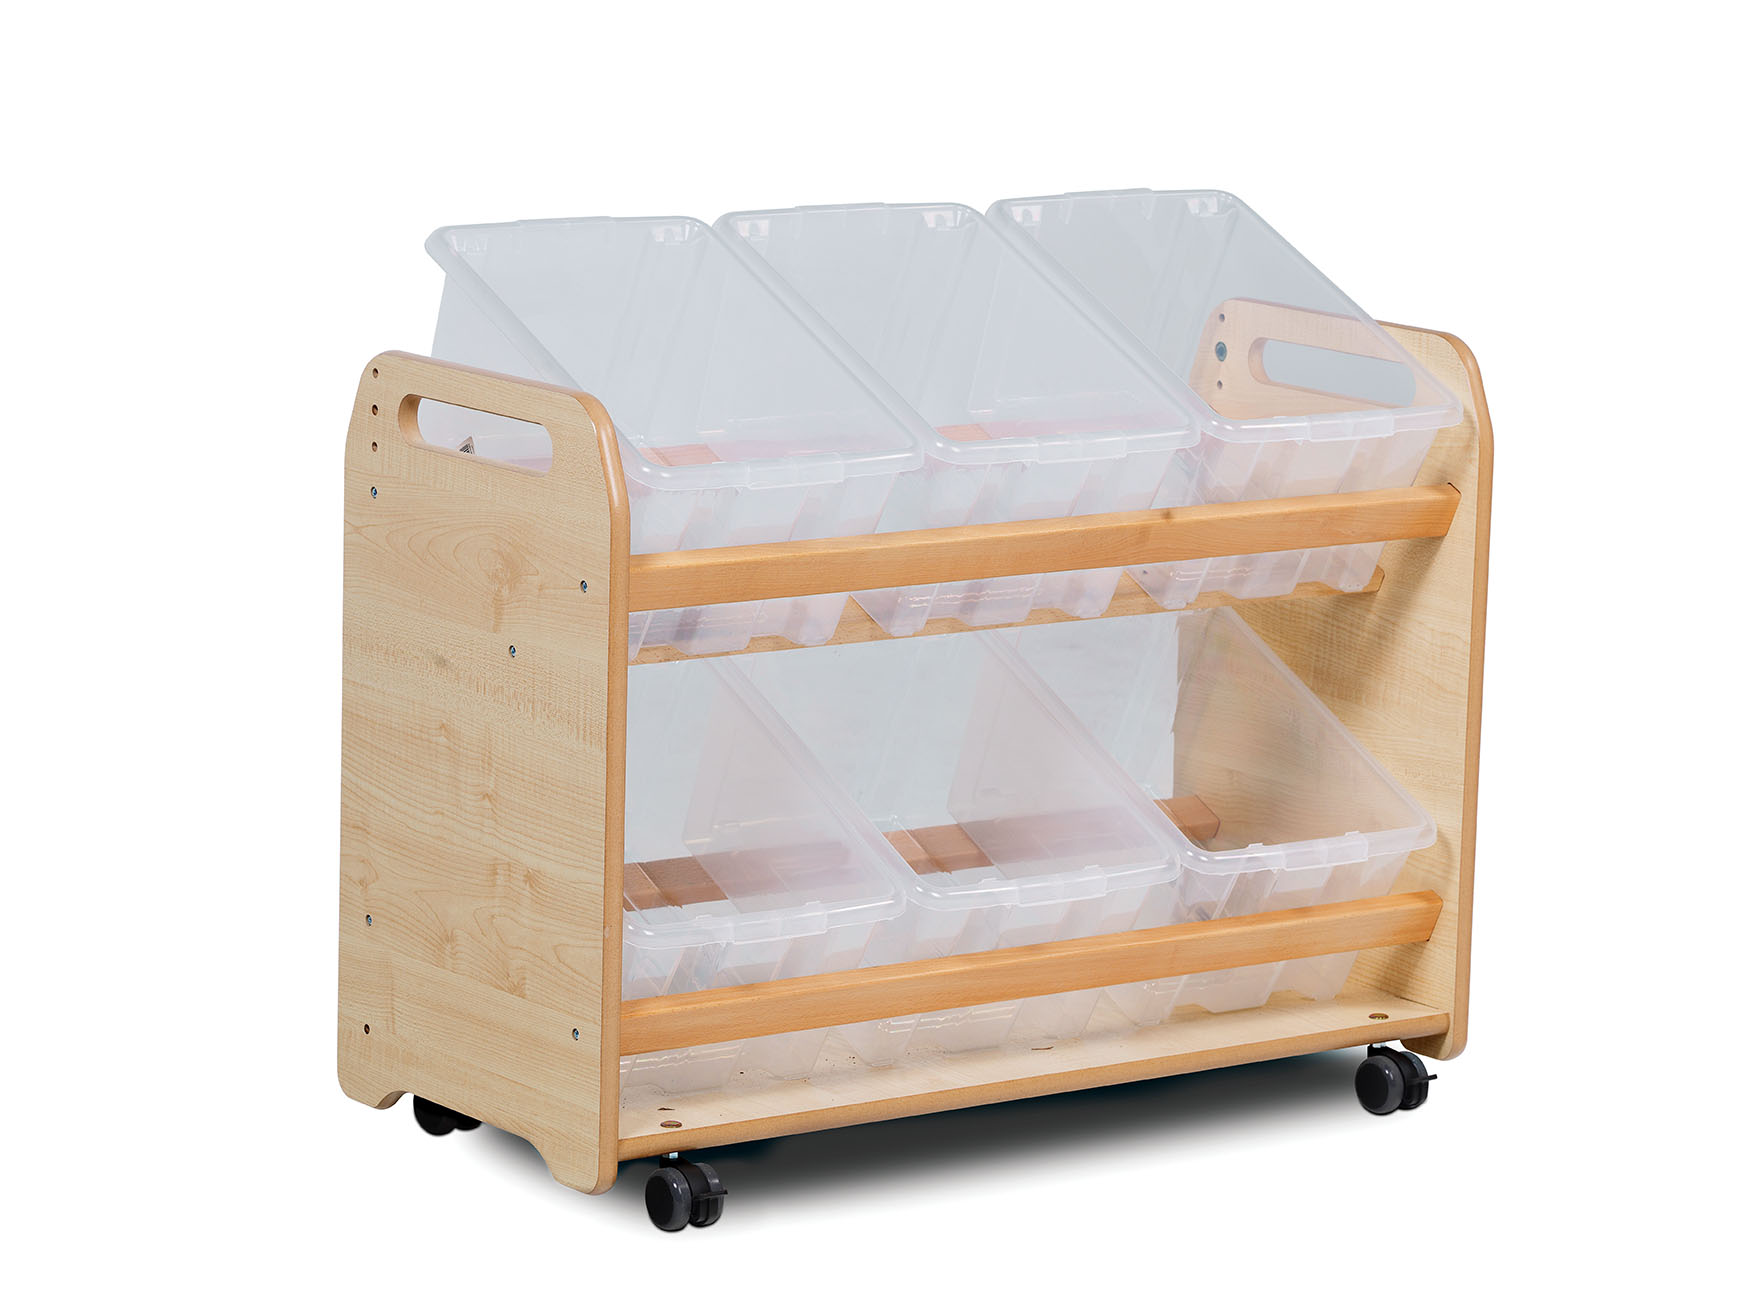 PT642-Millhouse-Early-Years-Furniture-Tilt-Tote-Storage-With-Tubs_Main_RGB.jpg